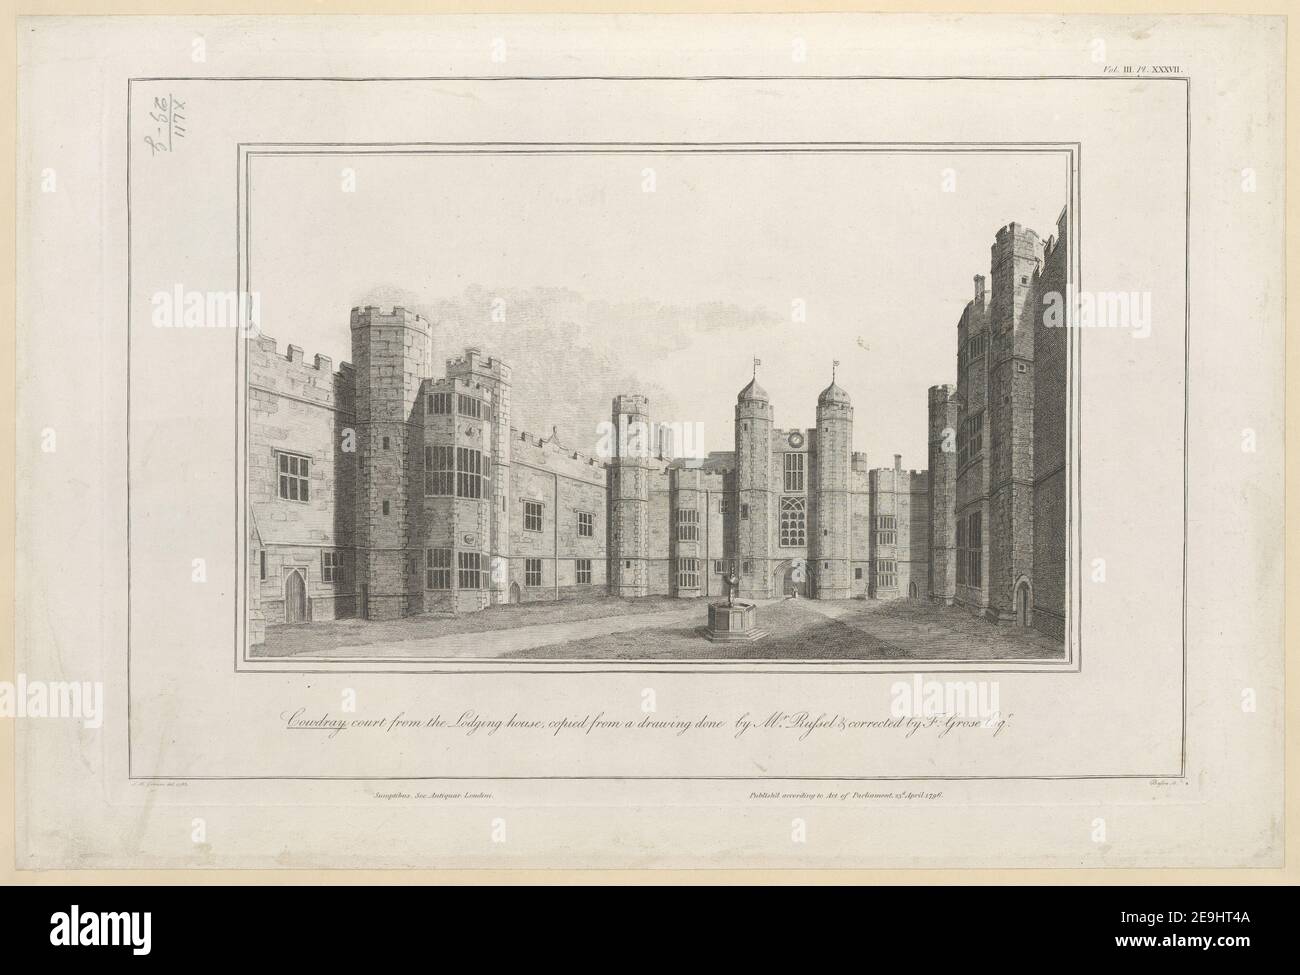 Cowdray court from the Lodging house, copied from a drawing done by Mr. Russel & corrected by F: Grose Esq.r.  Author  Basire, James 42.29.g. Place of publication: [London] Publisher: Sumptibus Soc. Antiquar. Londini. Publish'd according to Act of Parliament, 23.d April, Date of publication: 1796.  Item type: 1 print Medium: etching Dimensions: platemark 30.8 x 45.5 cm.  Former owner: George III, King of Great Britain, 1738-1820 Stock Photo